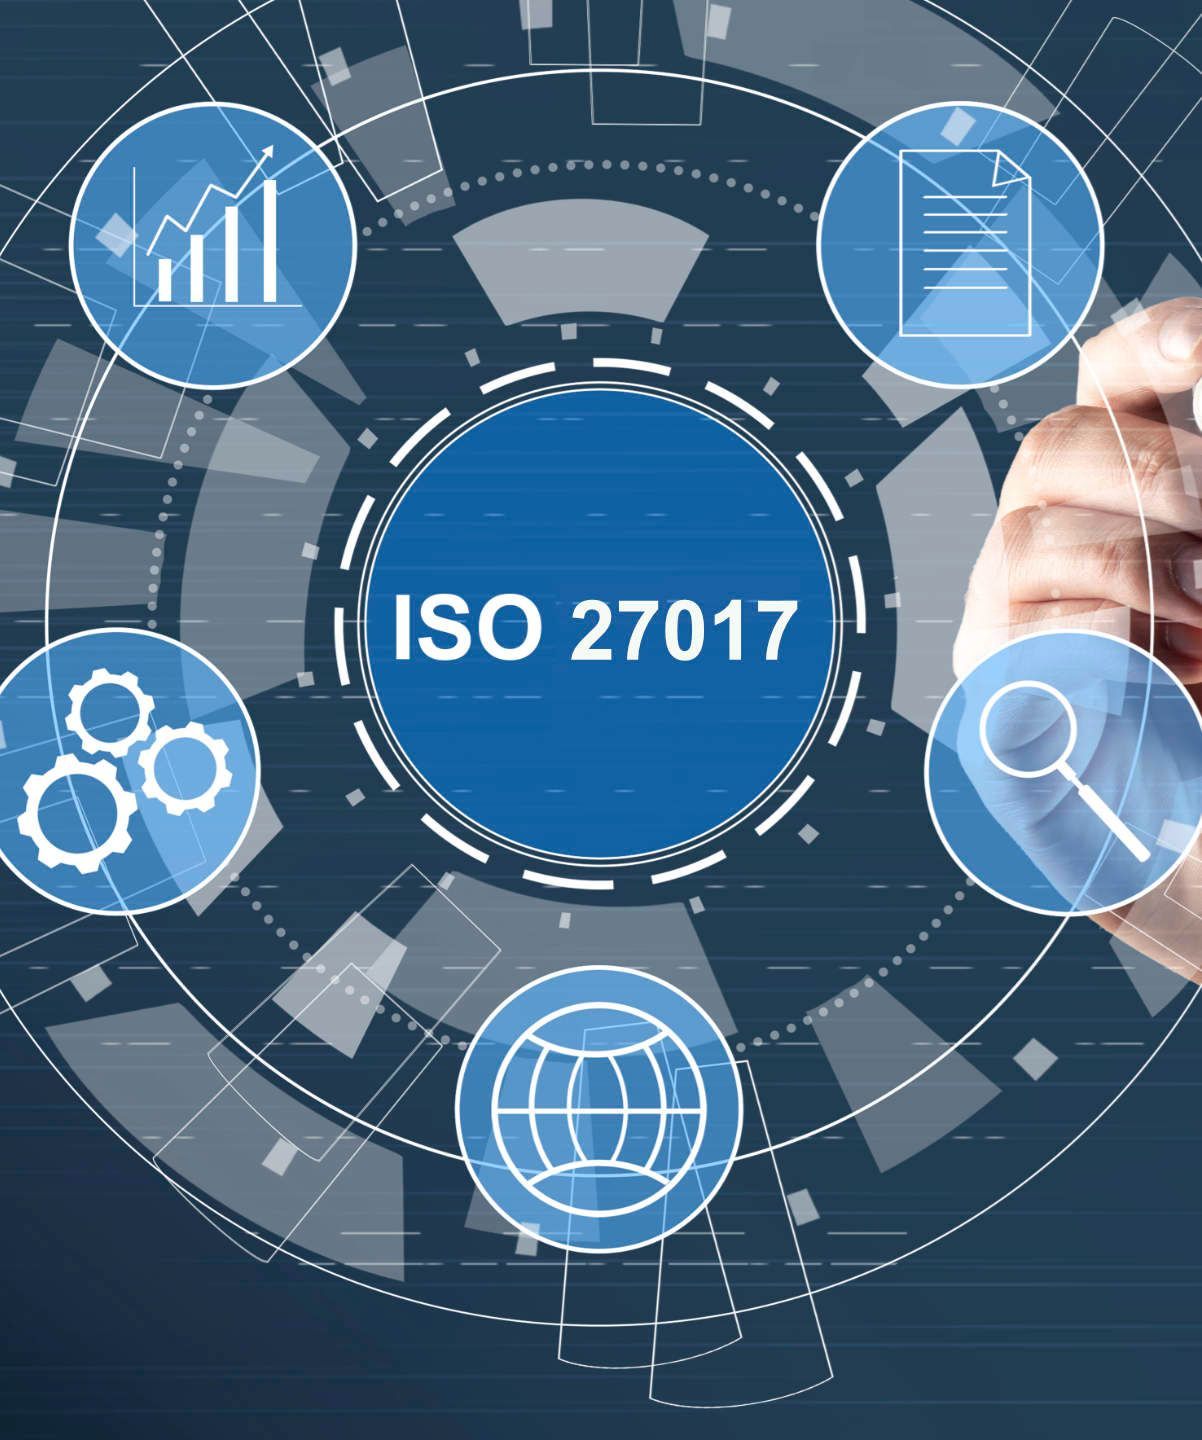 Why should SaaS companies comply with the ISO/IEC 27017 security standard for cloud service provider